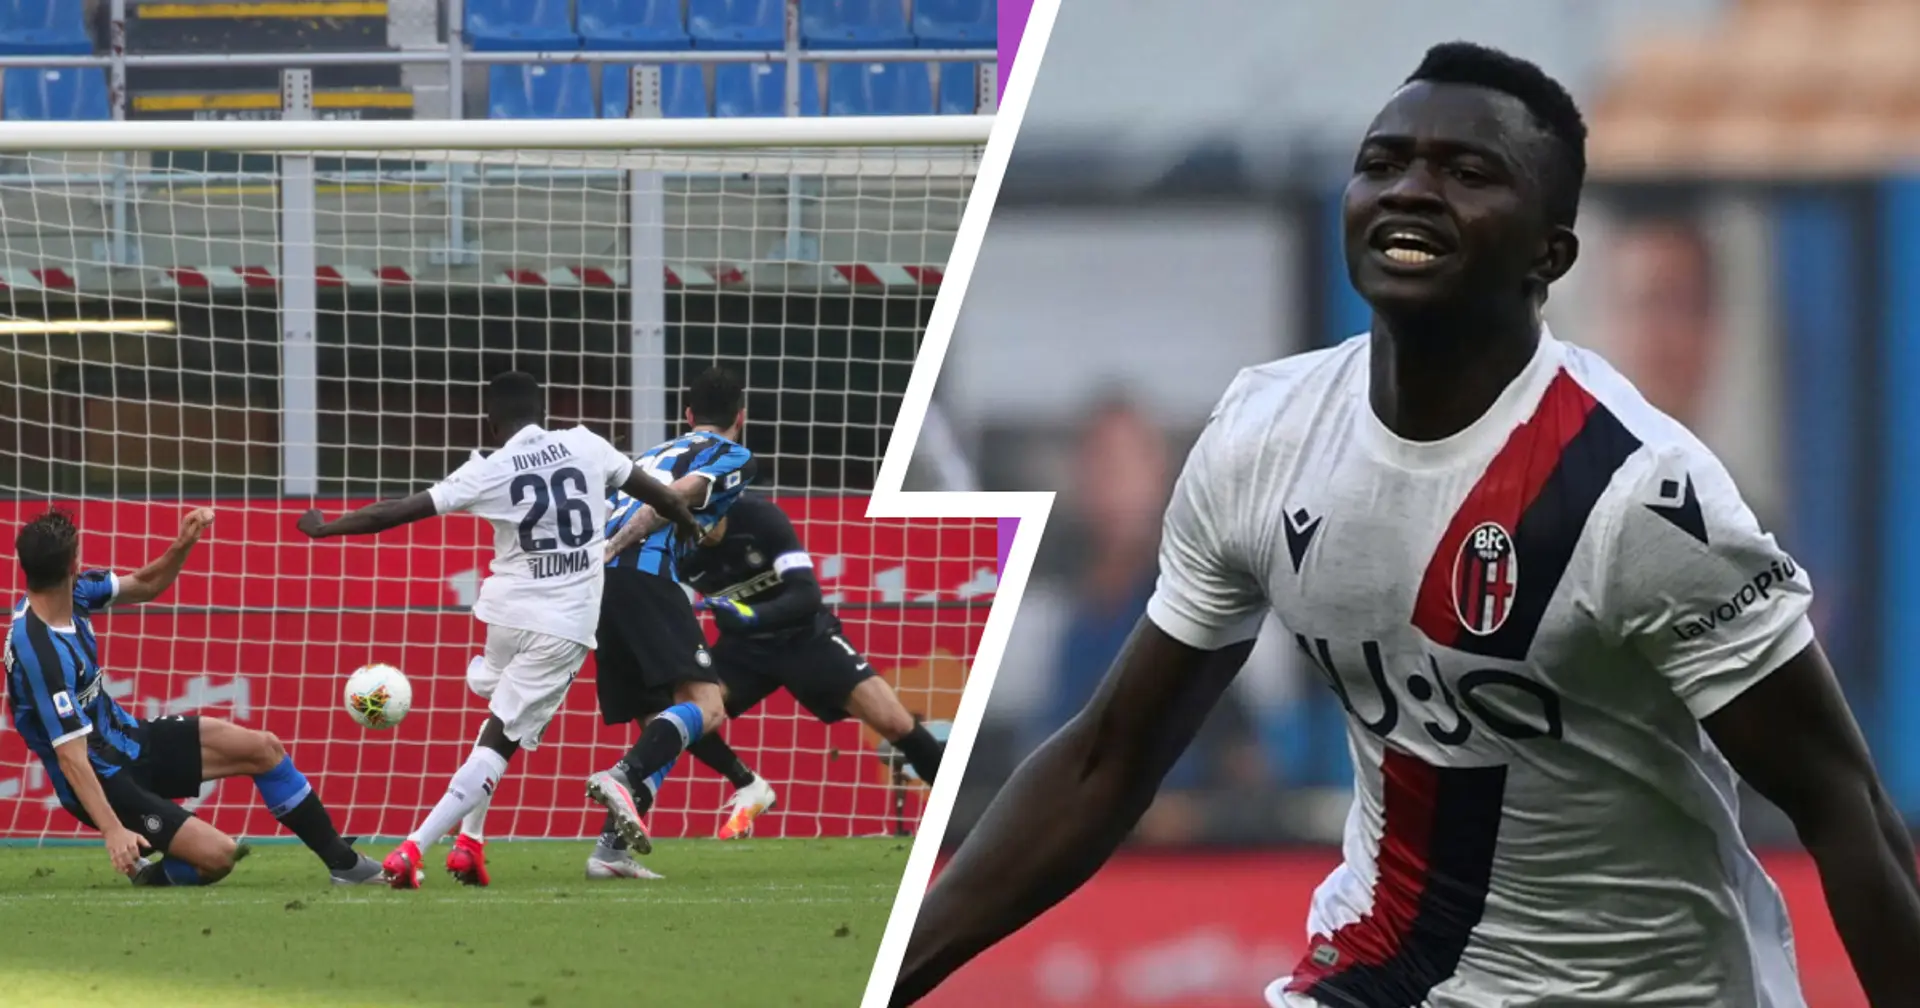 Started from the bottom now we're here: Encouraging story of Bologna hero Musa Juwara